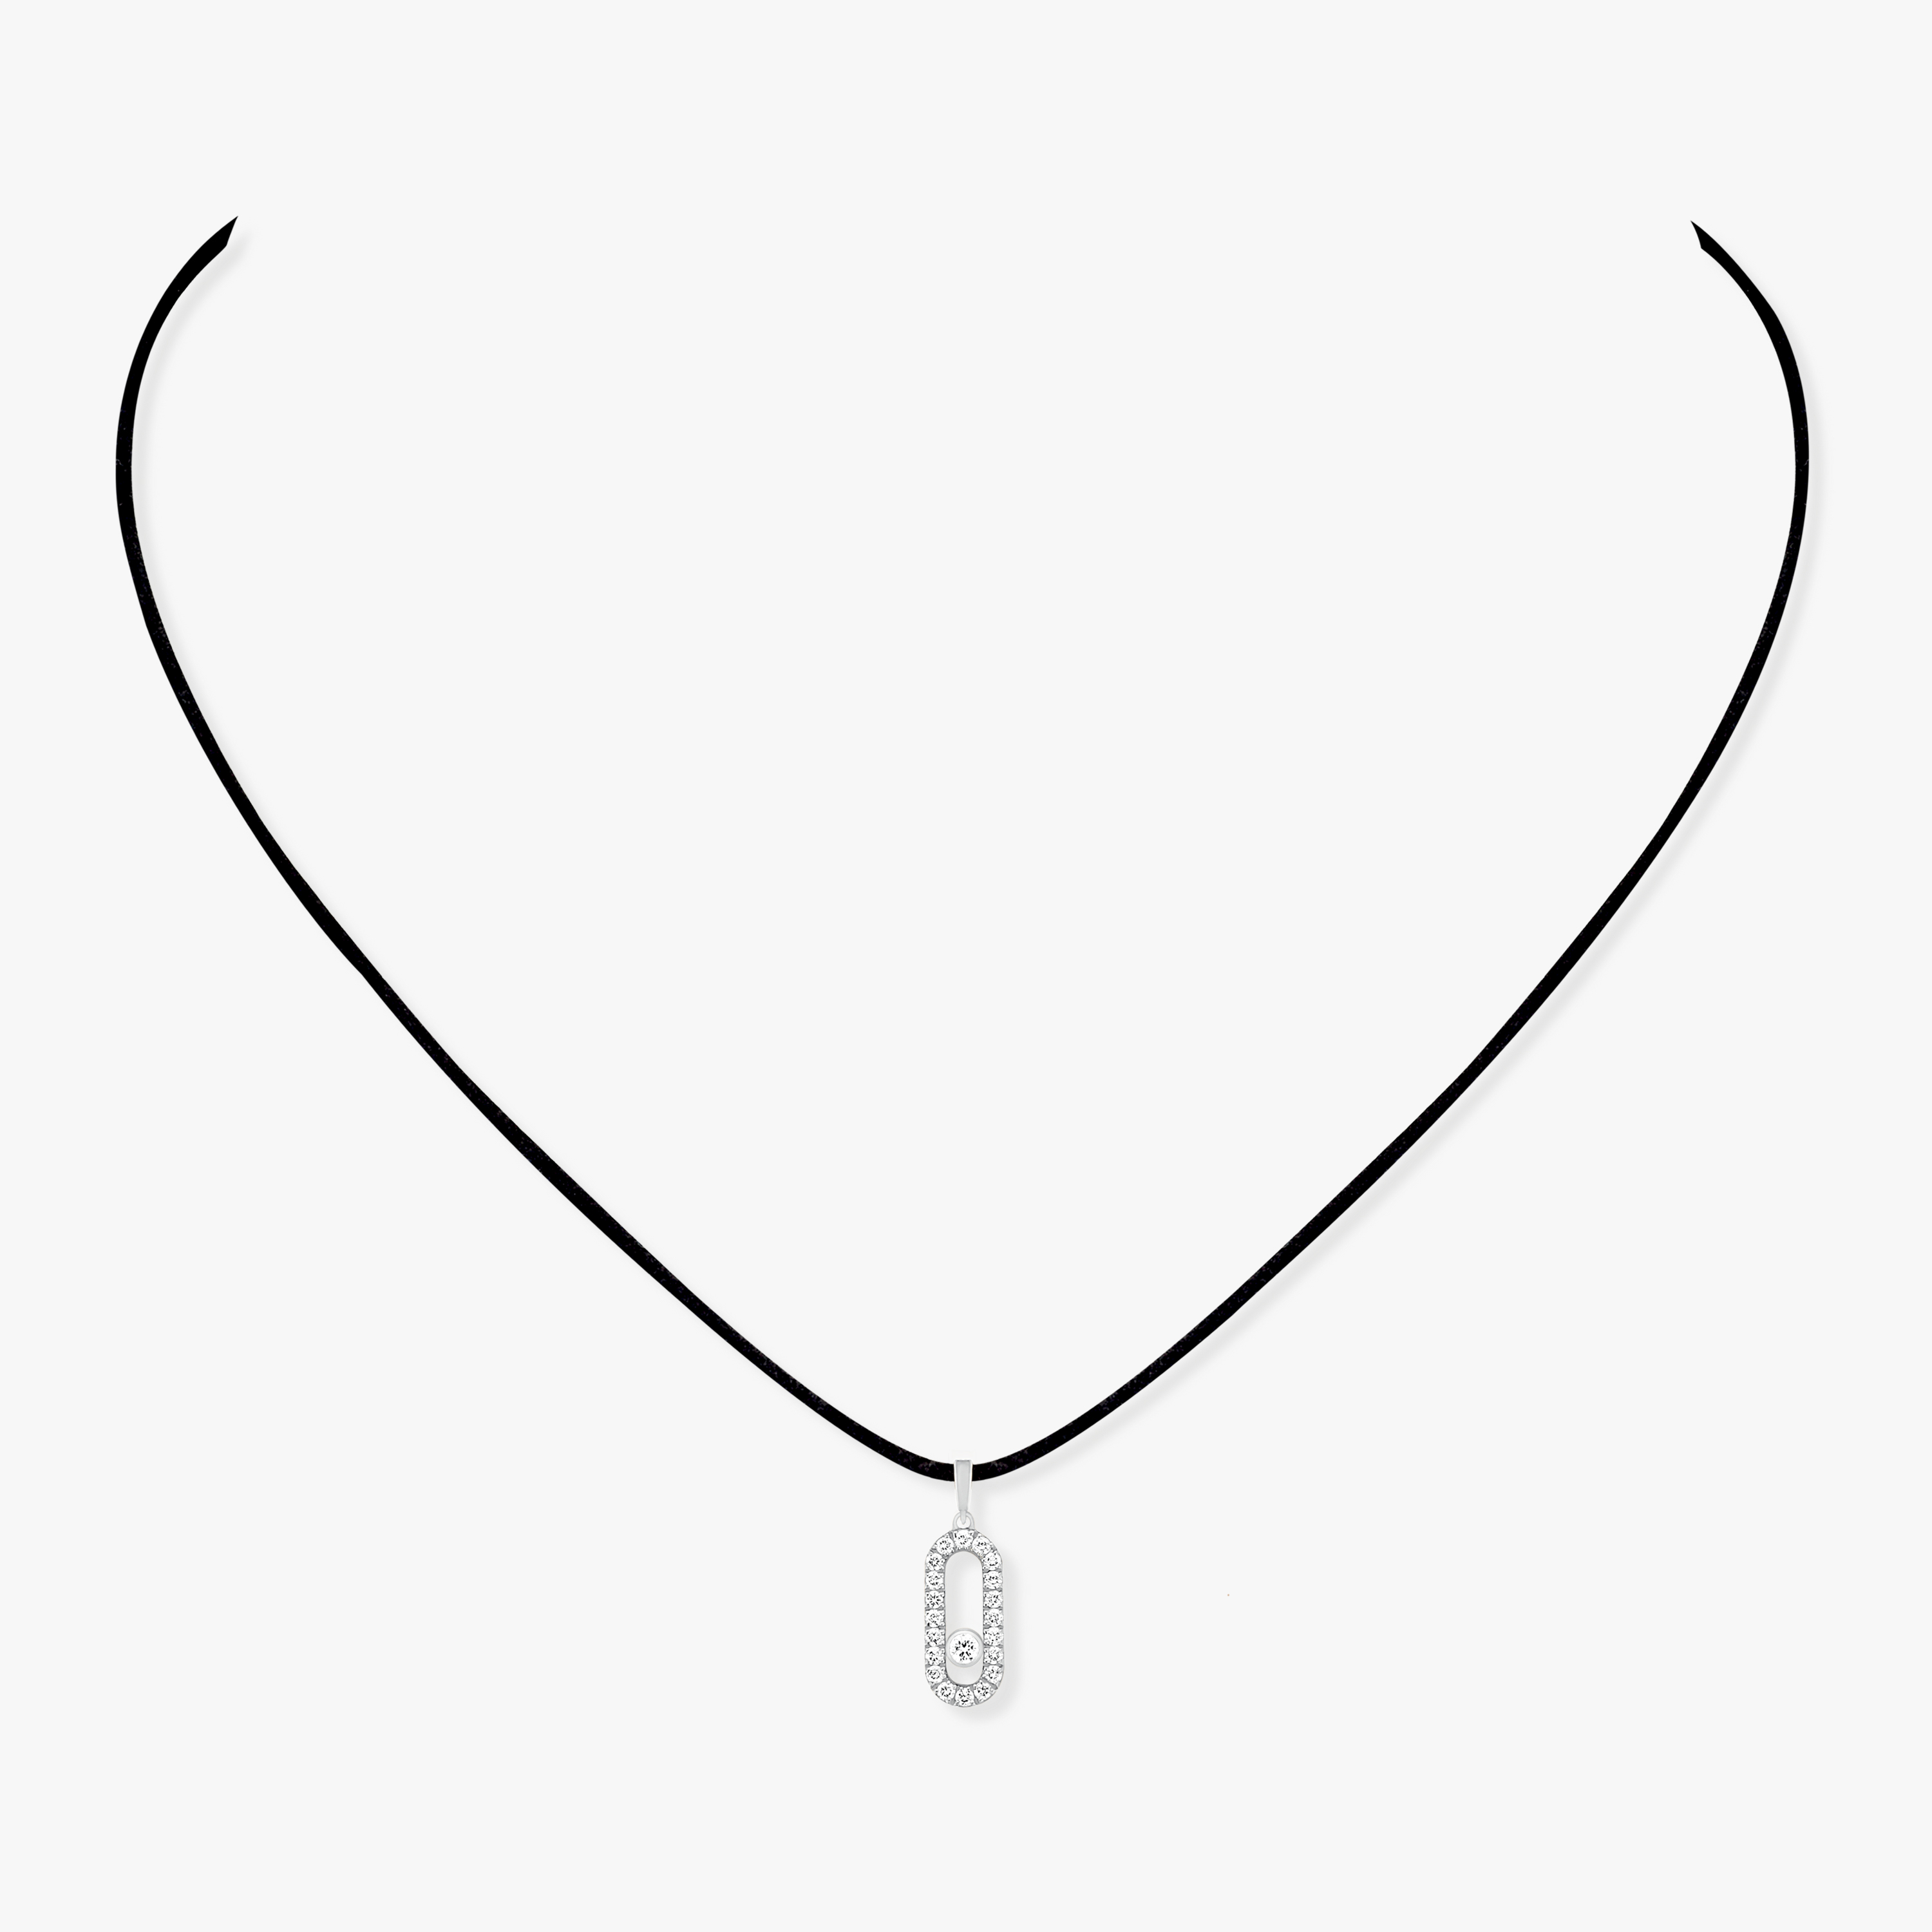 Collier Femme Or Blanc Diamant Messika CARE(S) Pavé 12073-WG